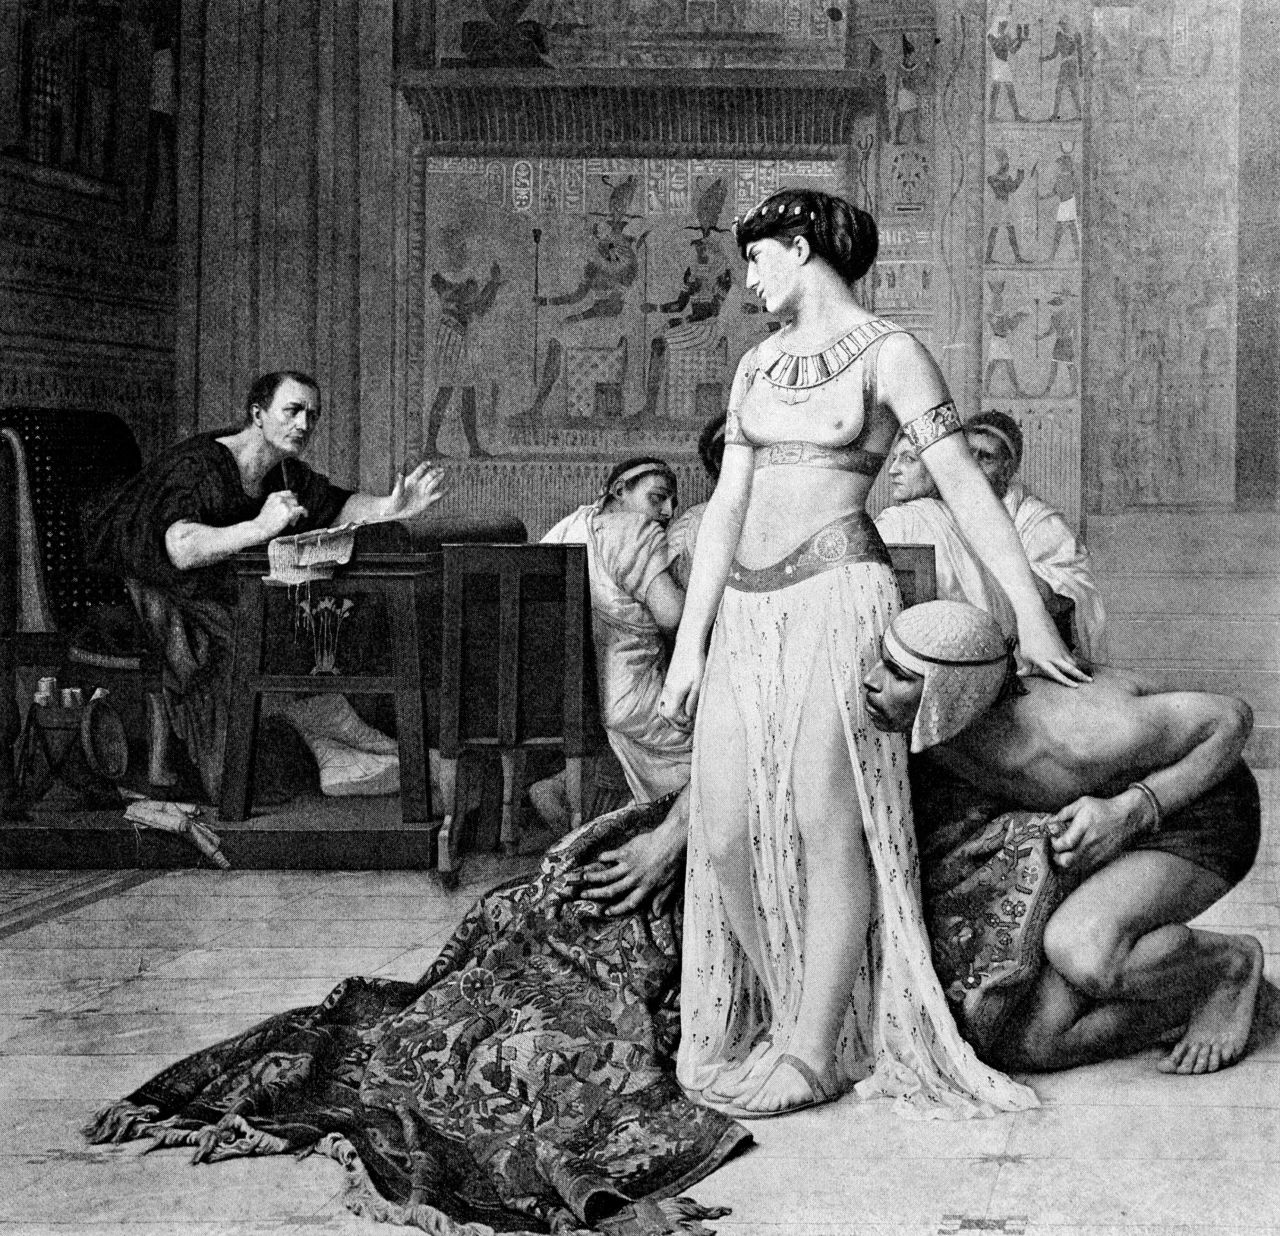 A 19th-century engraving shows Cleopatra surprising Julius Caeser at their first meeting.